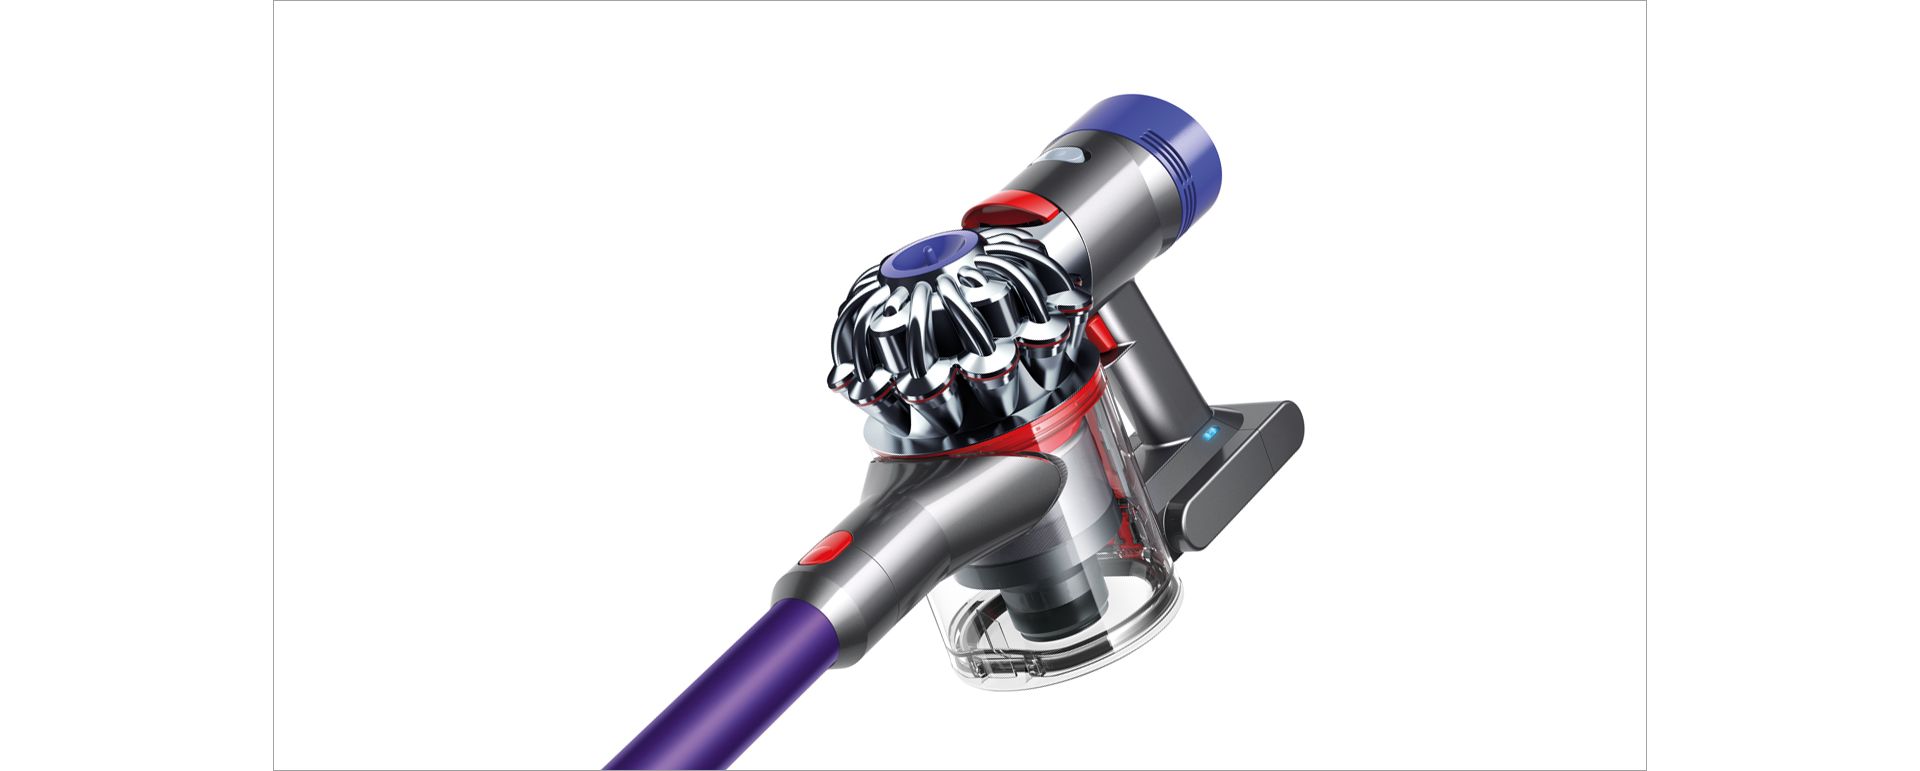 Replacement Dyson V7™ cordless vacuum battery